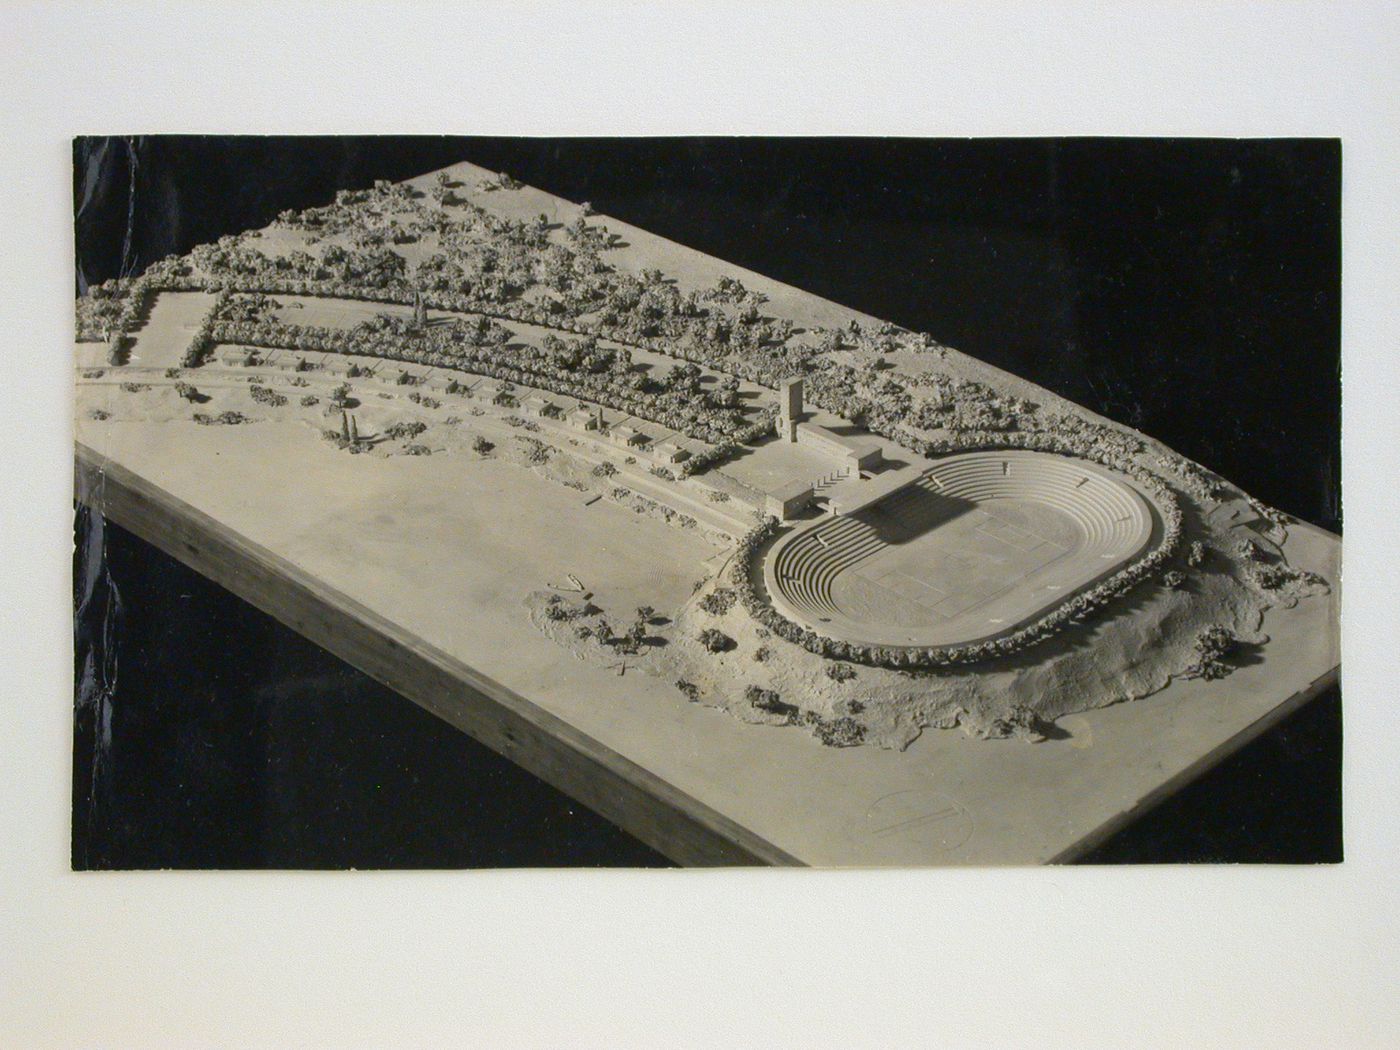 Photograph of model of proposed olympic stadium, Berlin, Germany